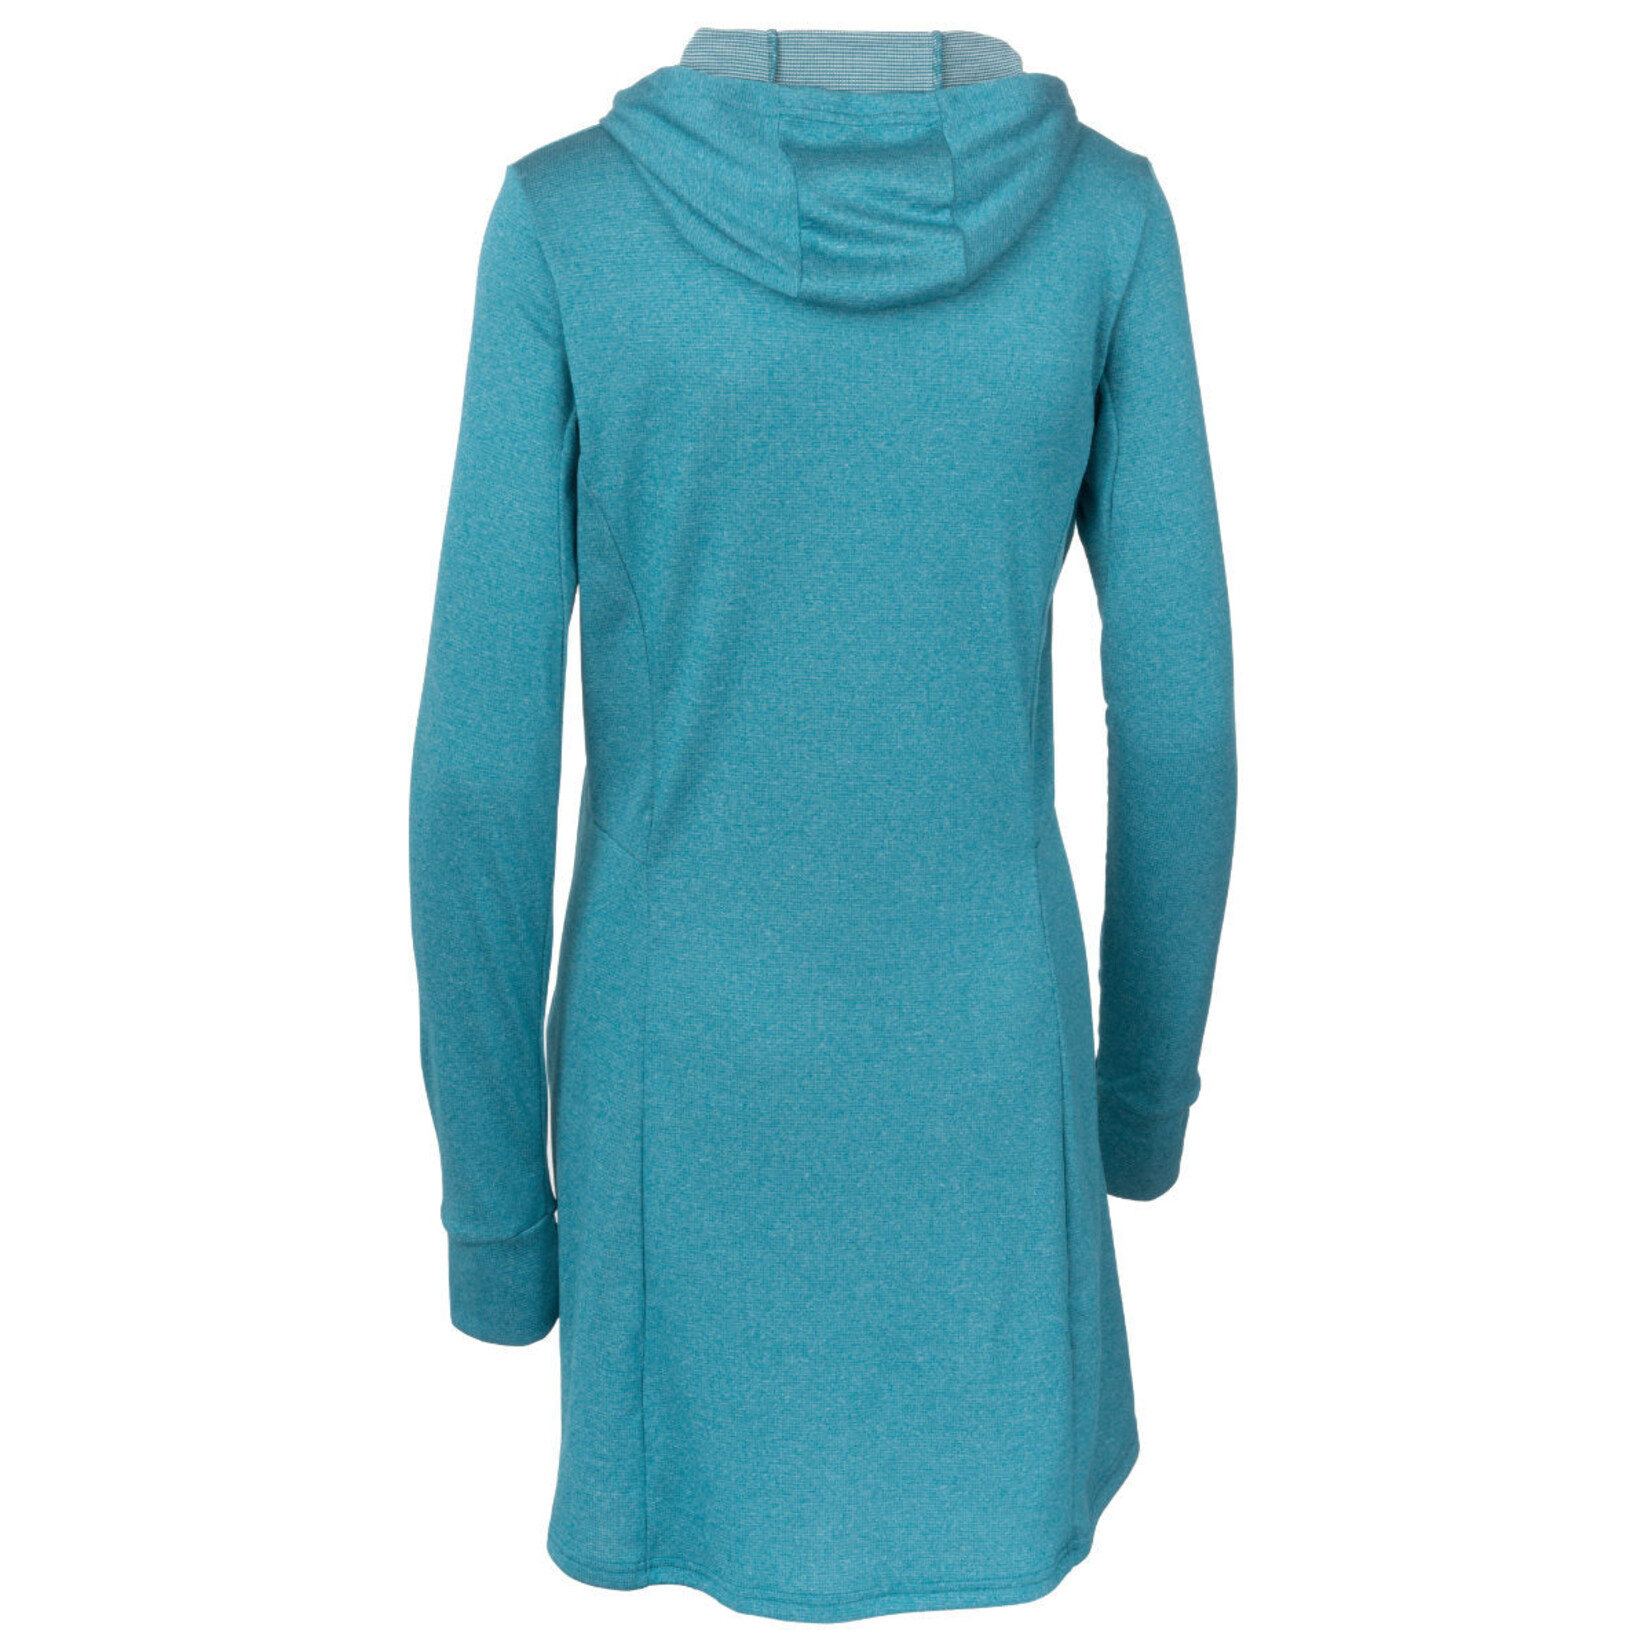 Immersion Research Immersion Research Women's Lightweight Power Wool® Sendress